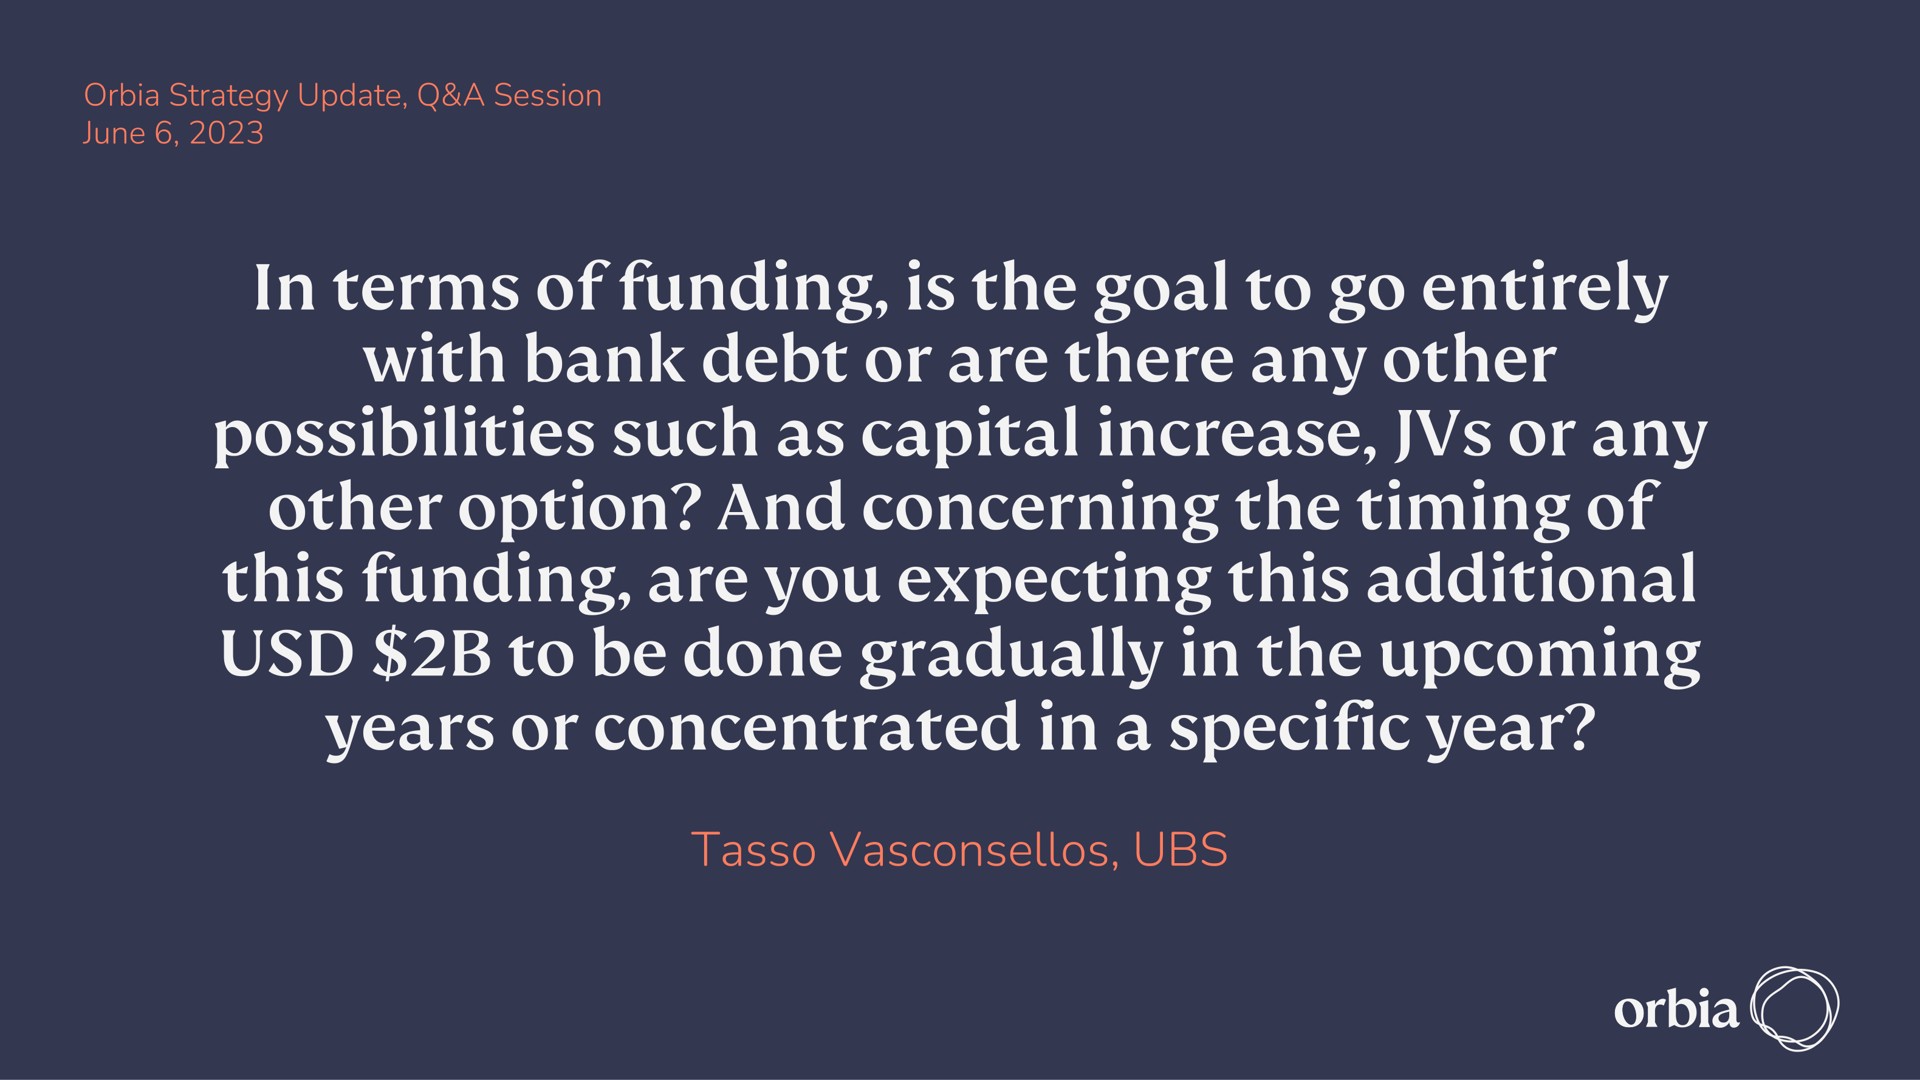 in terms of funding its the goal to go entirely with bank debt or are there any other possibilities such as capital increase or any other option and concerning the timing of this funding are you expecting this additional to be done gradually in the upcoming years or concentrated in a specific year rede | Orbia